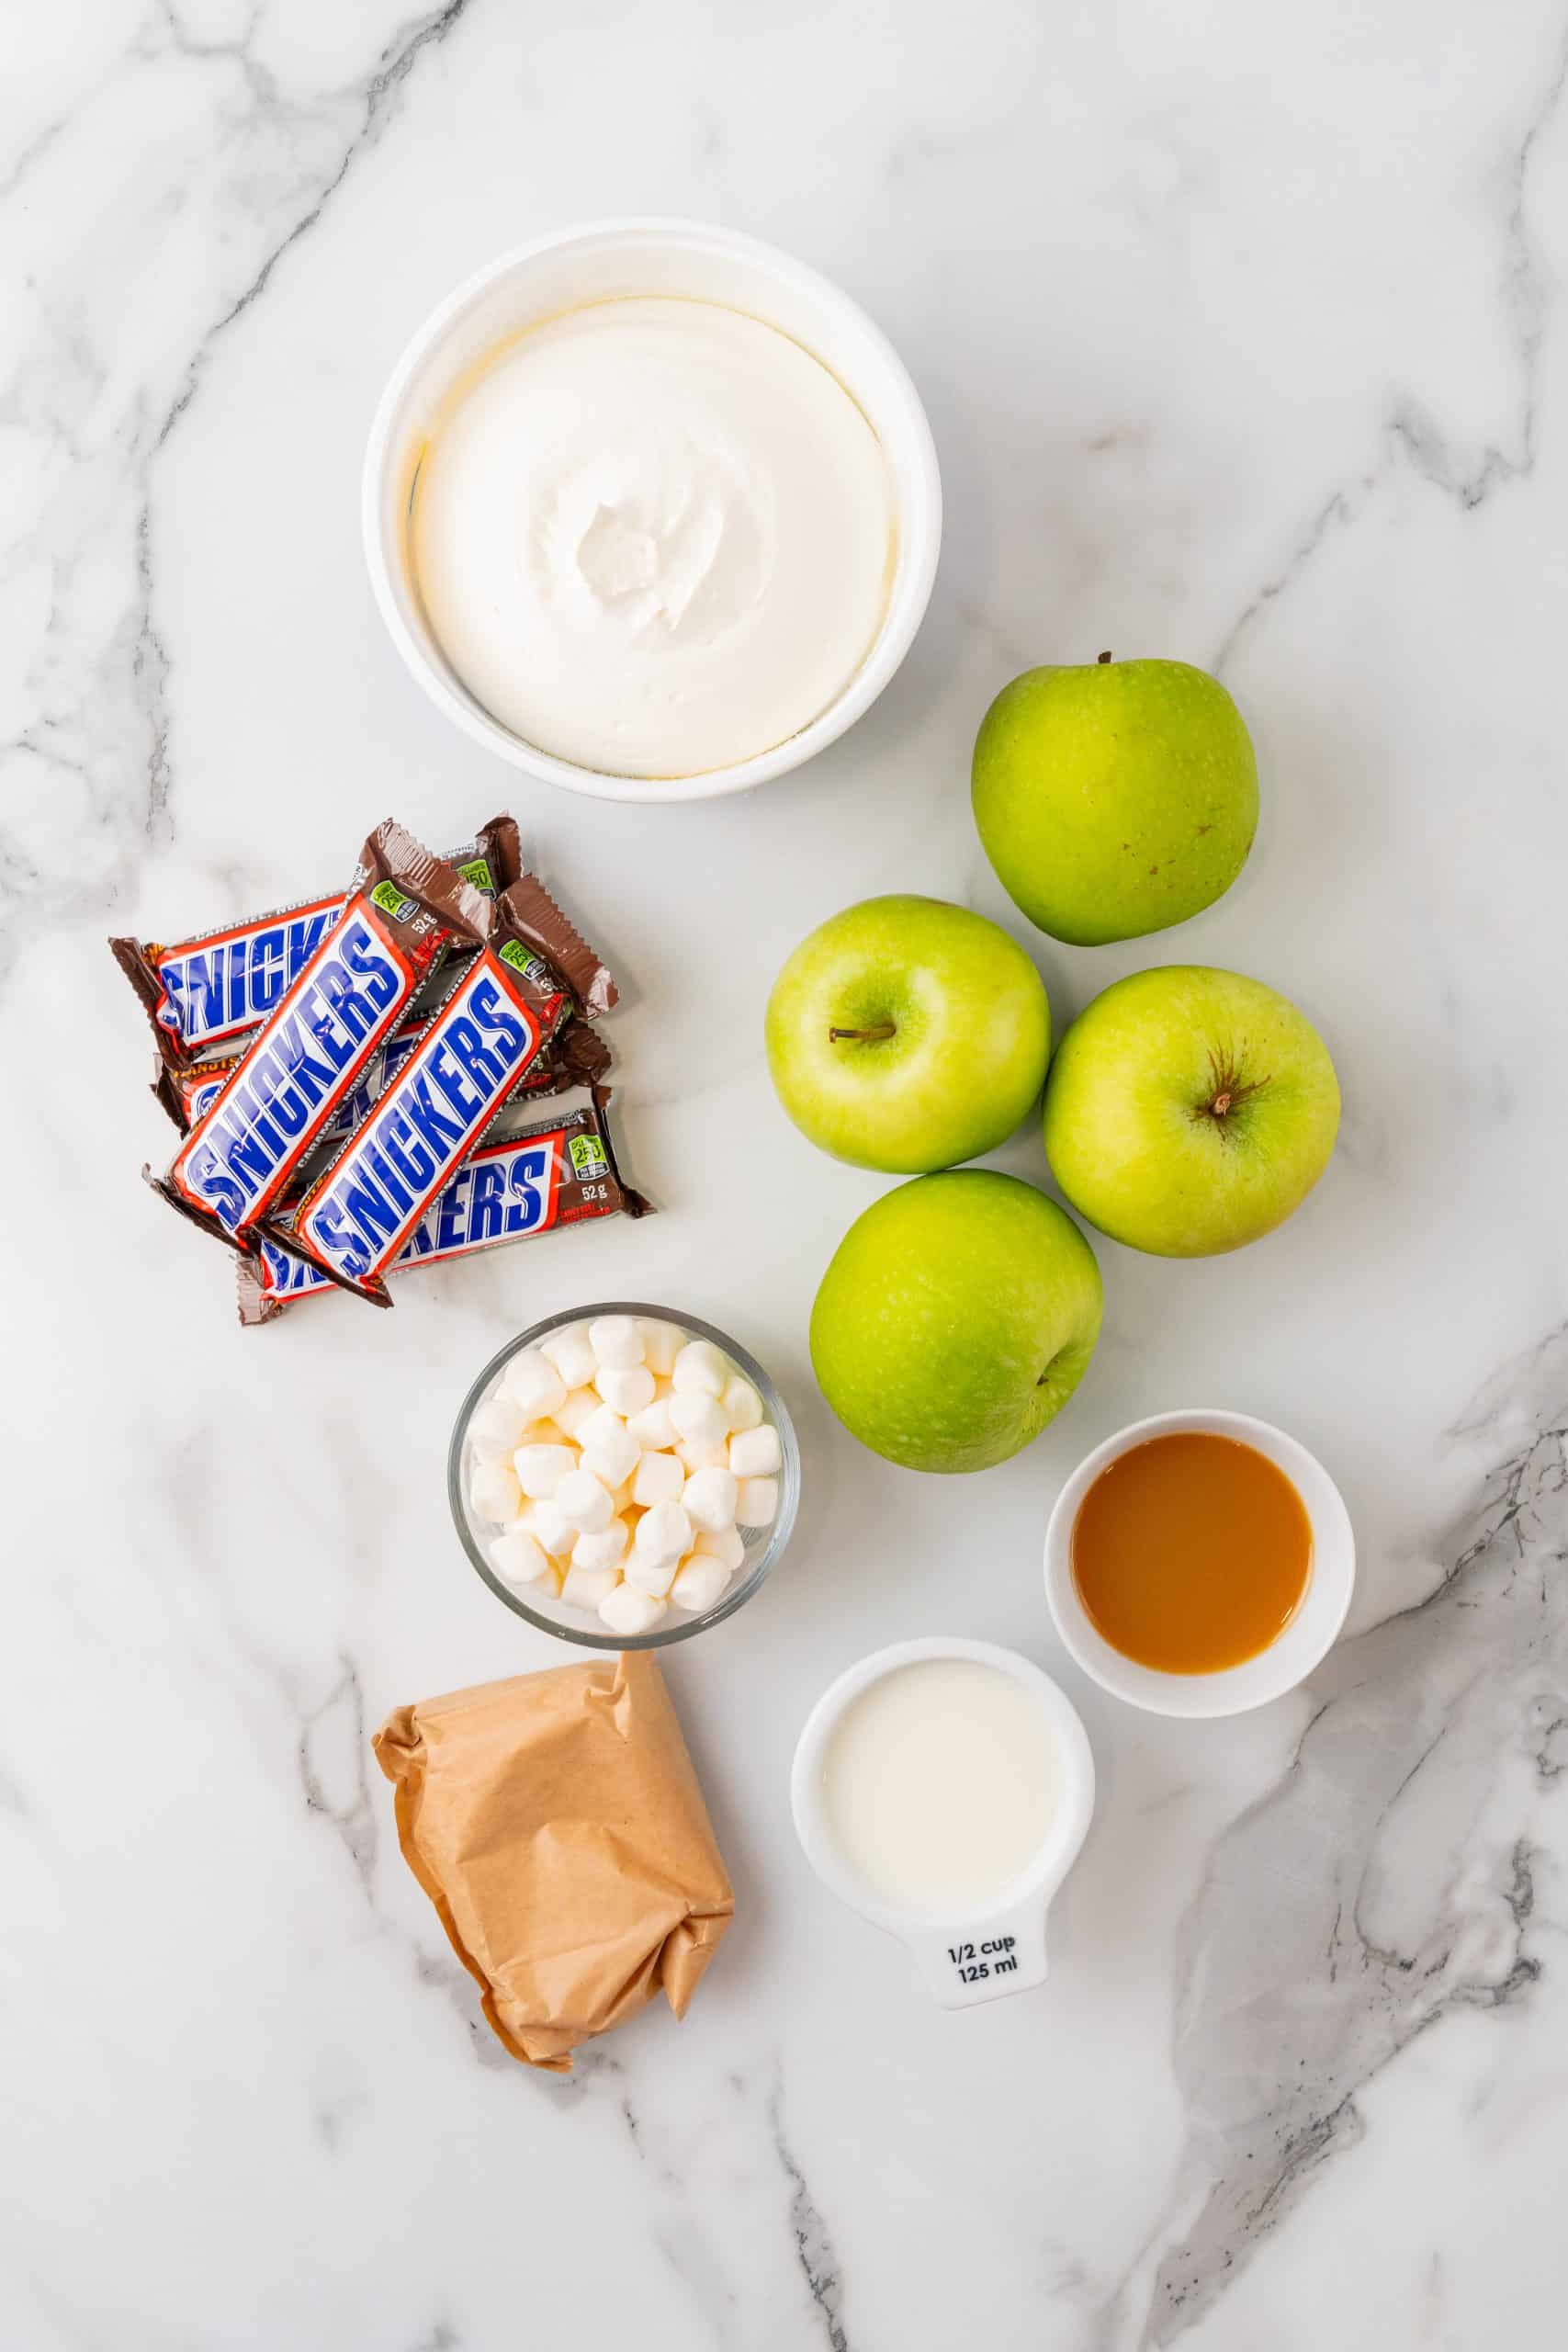 an overhead image showing the measured ingredients needed for a batch of snickers apple salad